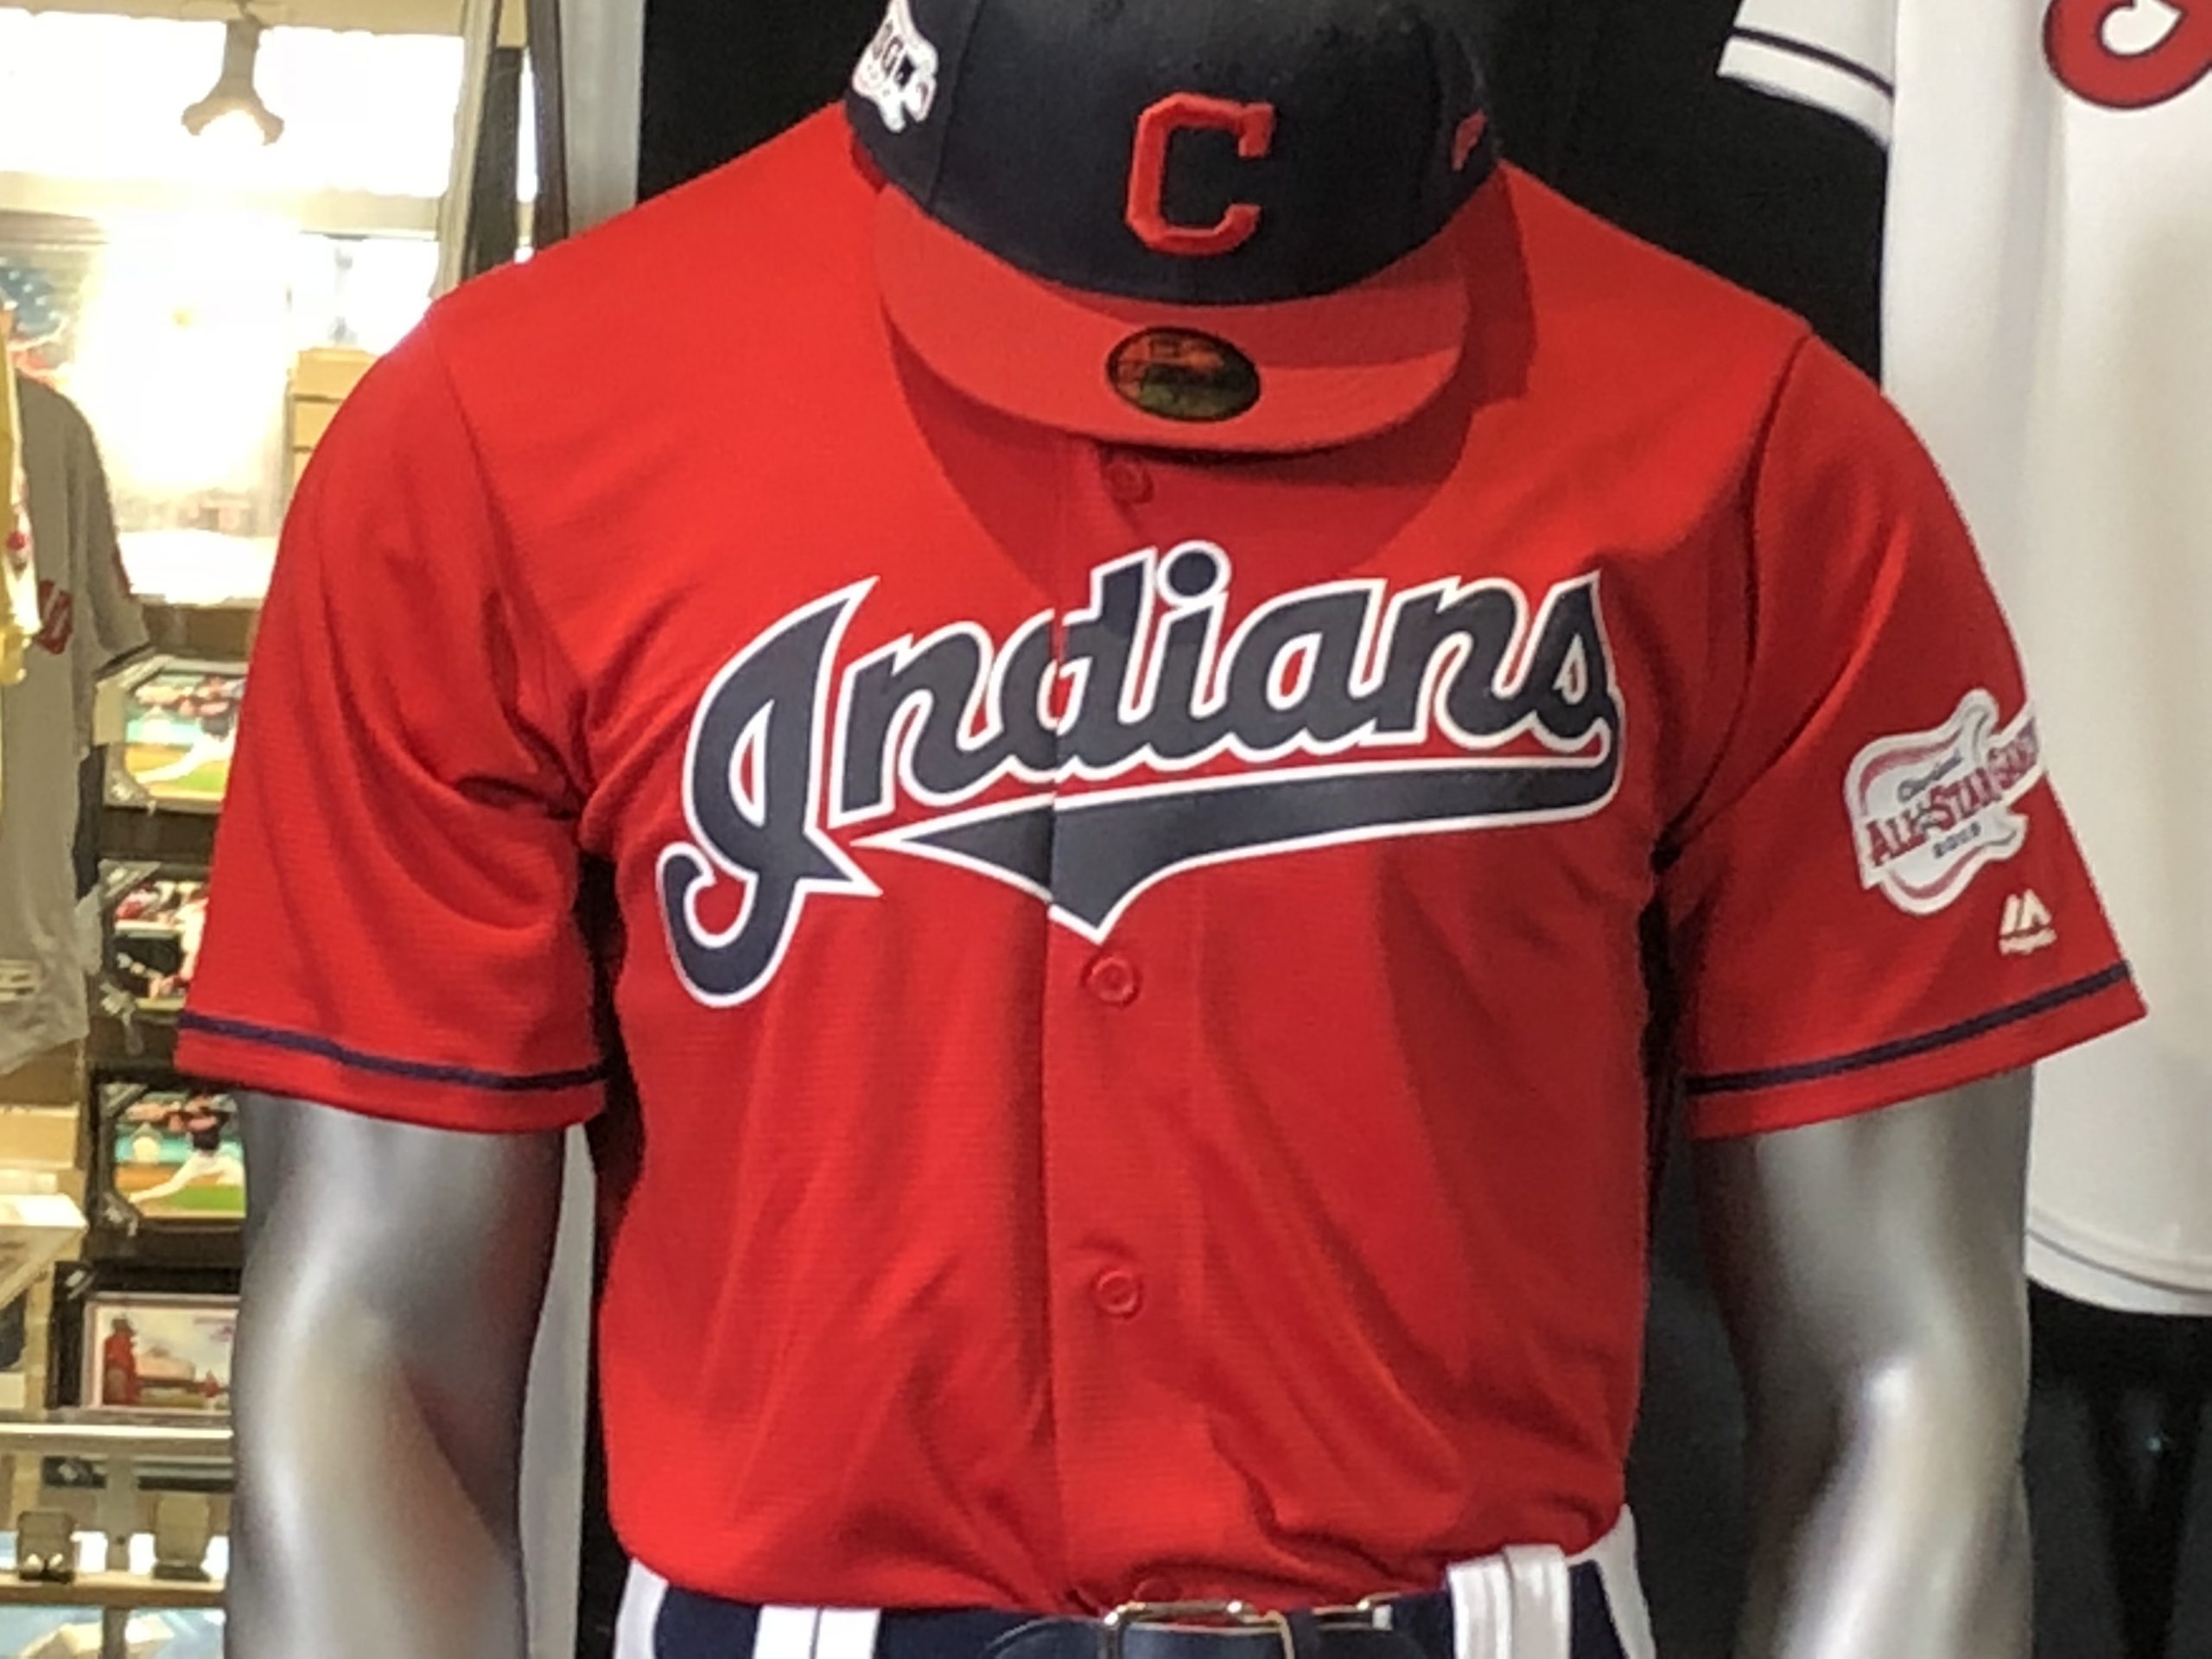 Indians Unveil New Uniforms for 2019; Show Off New Red Alternate Home  Uniform